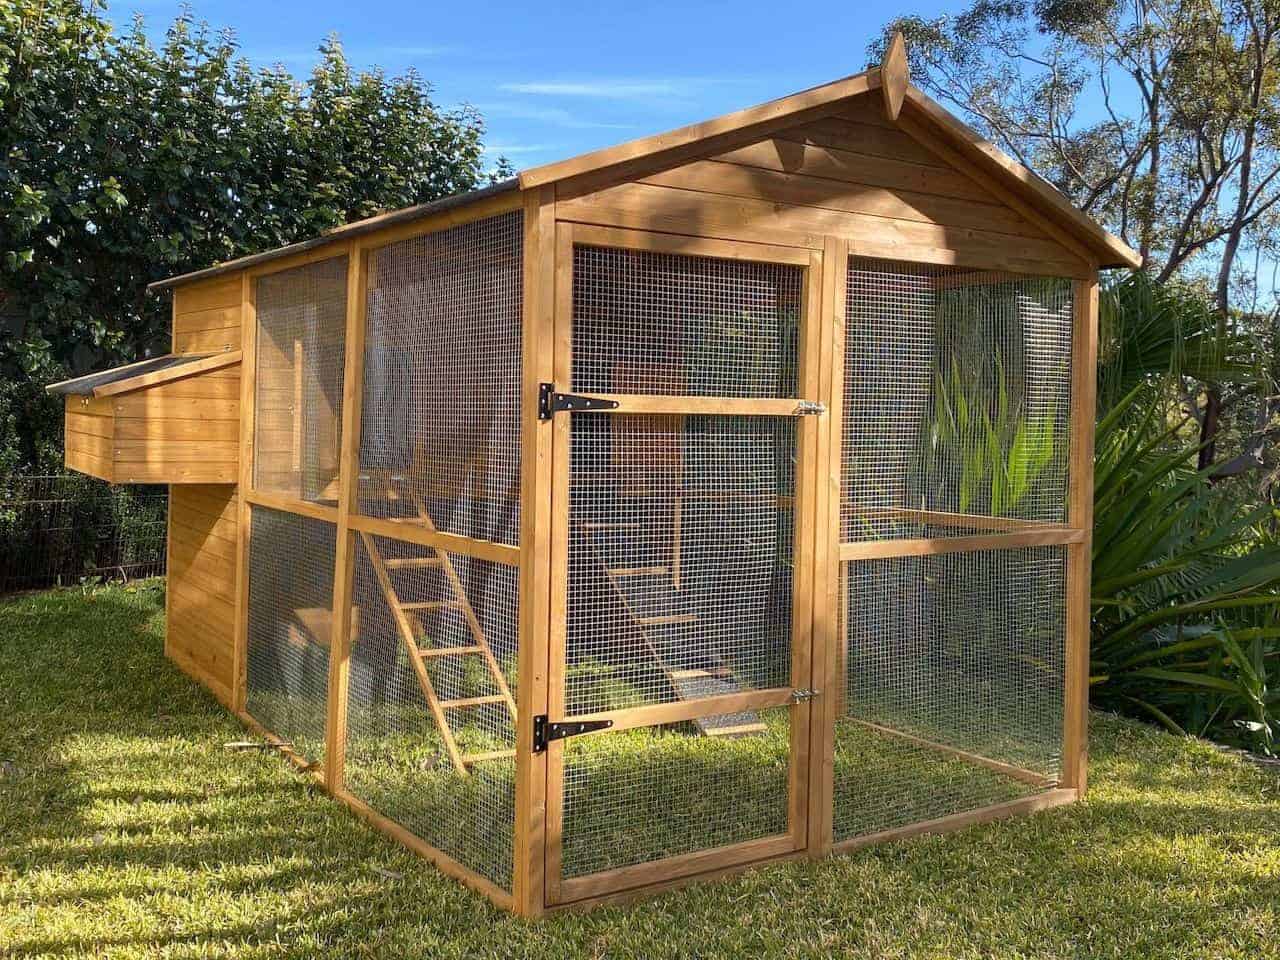 Homestead Chicken Coop is our tallest coop ever